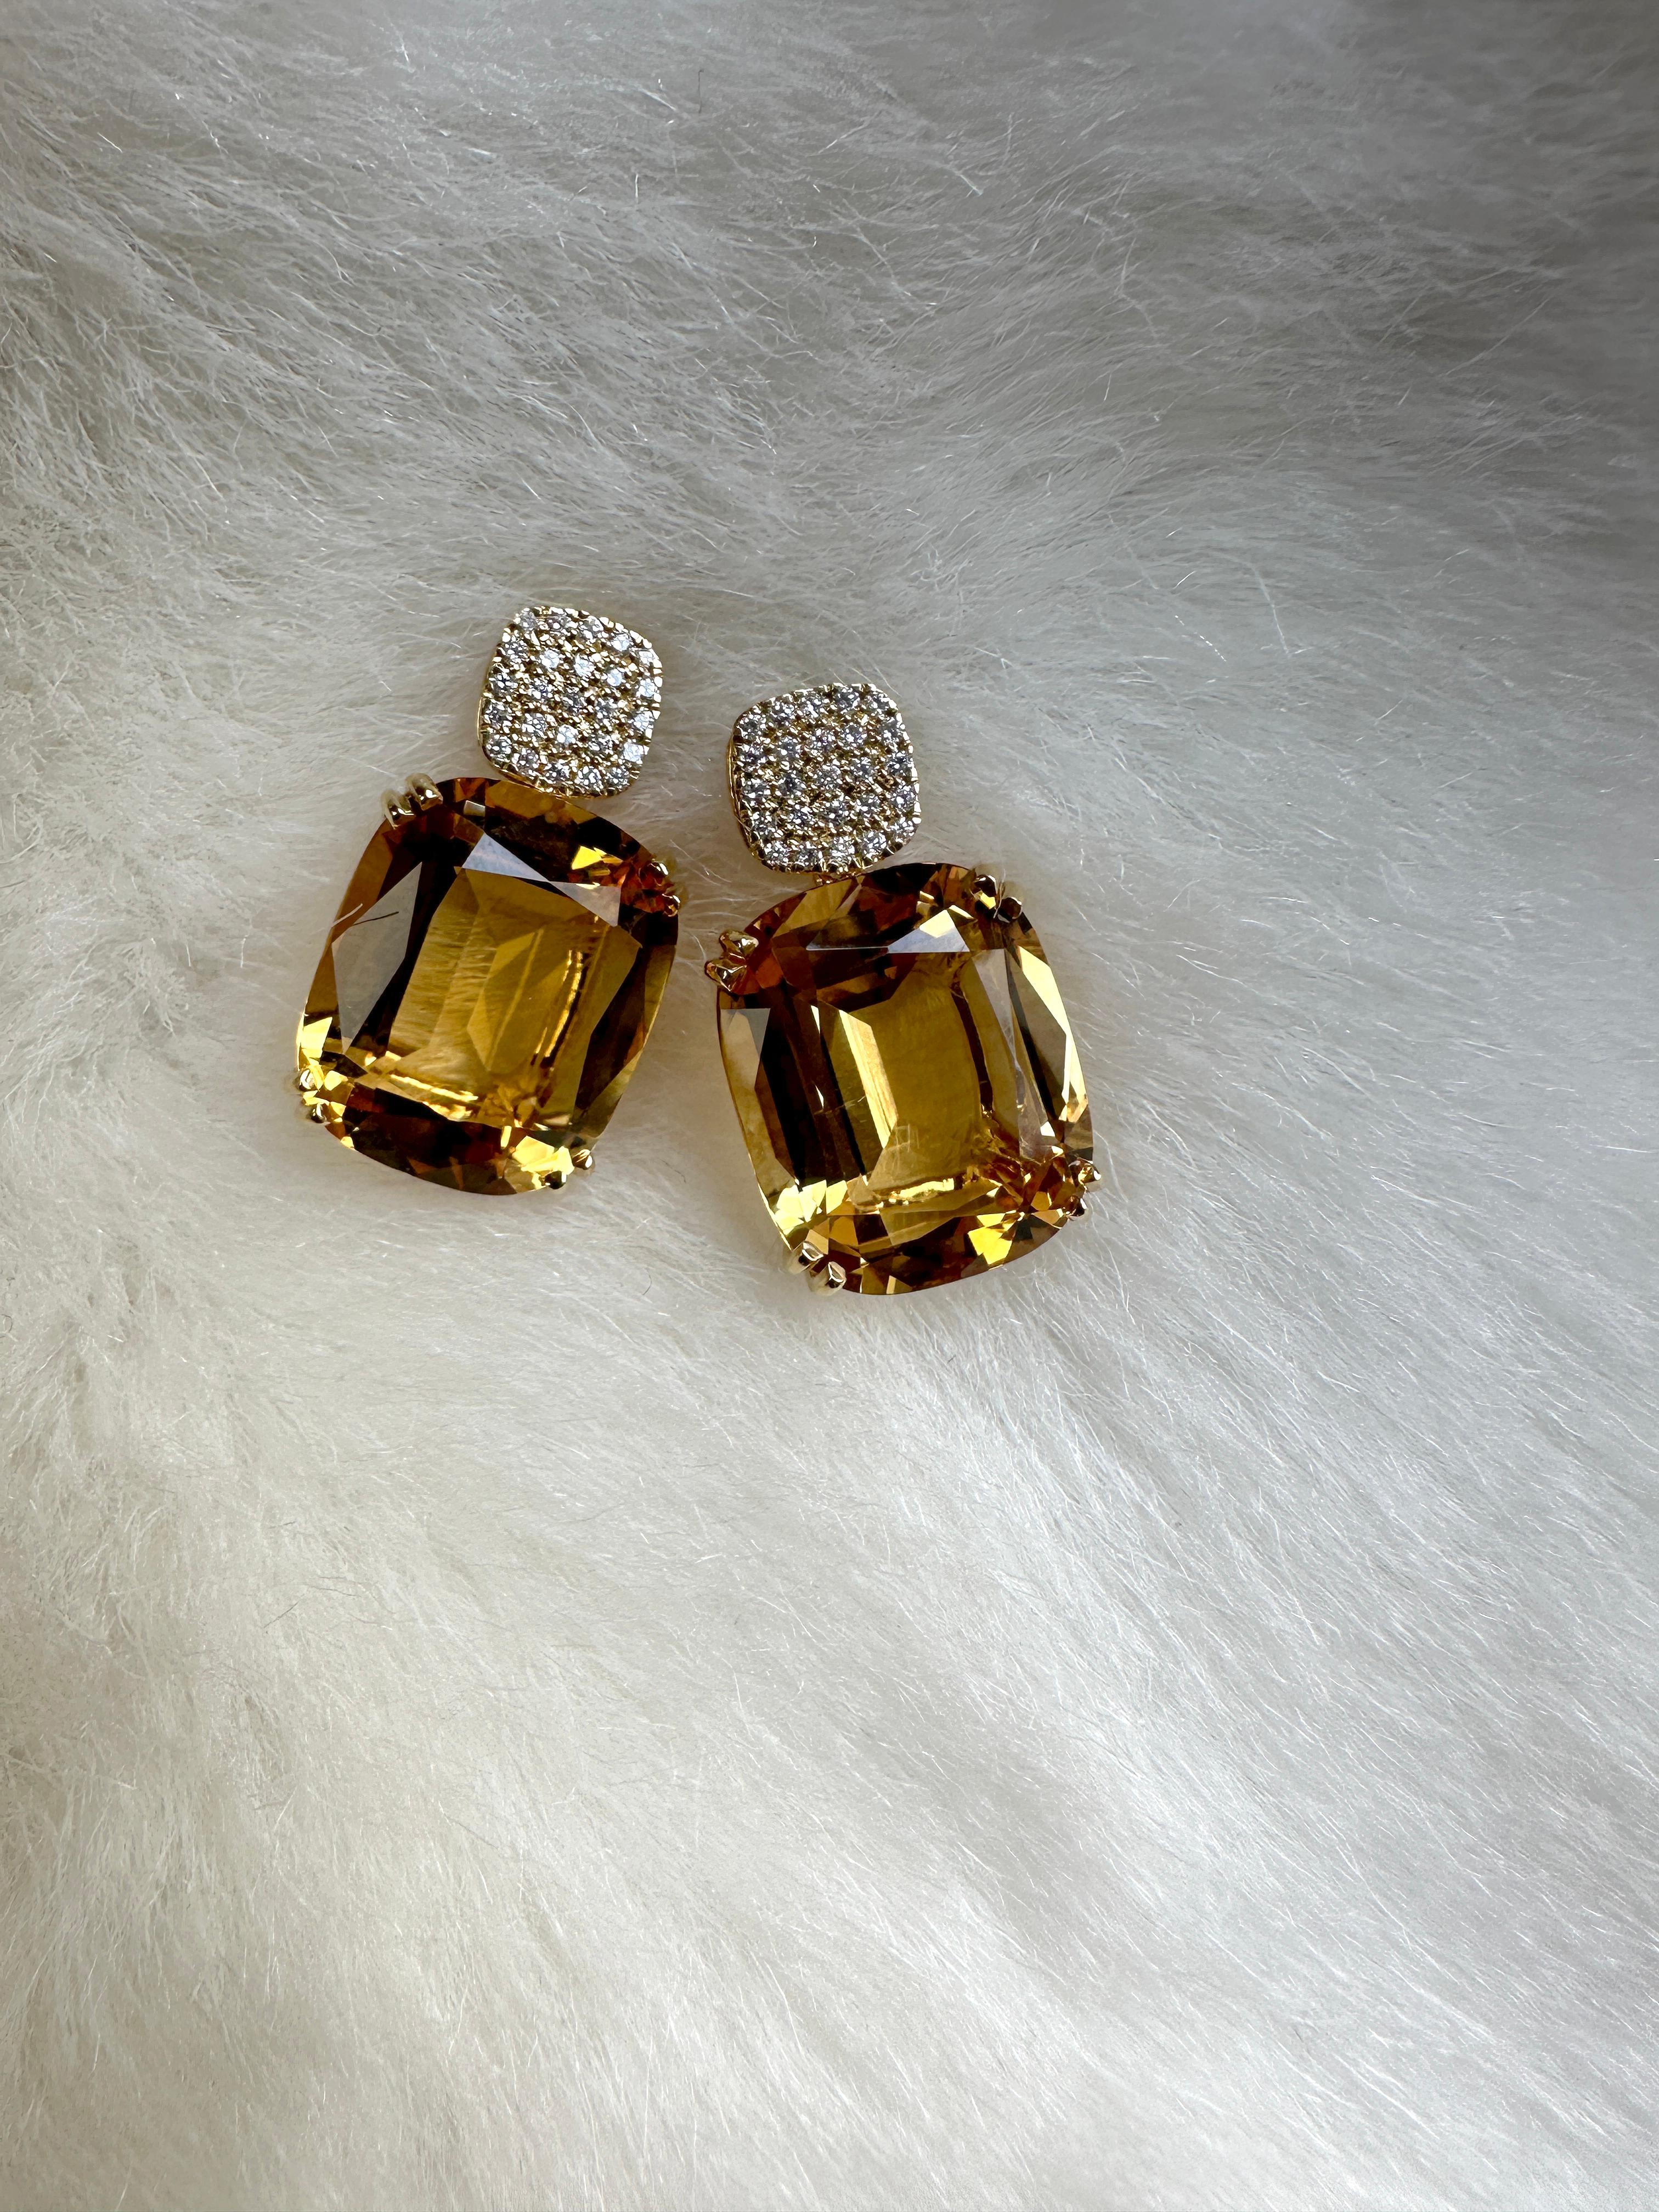 Introducing the stunning Citrine Cushion & Diamonds Earrings from our popular 'Gossip' Collection. 
The focal point of these earrings is the mesmerizing citrine cushion-cut gemstone. The cushion-cut shape adds a touch of vintage charm, while the